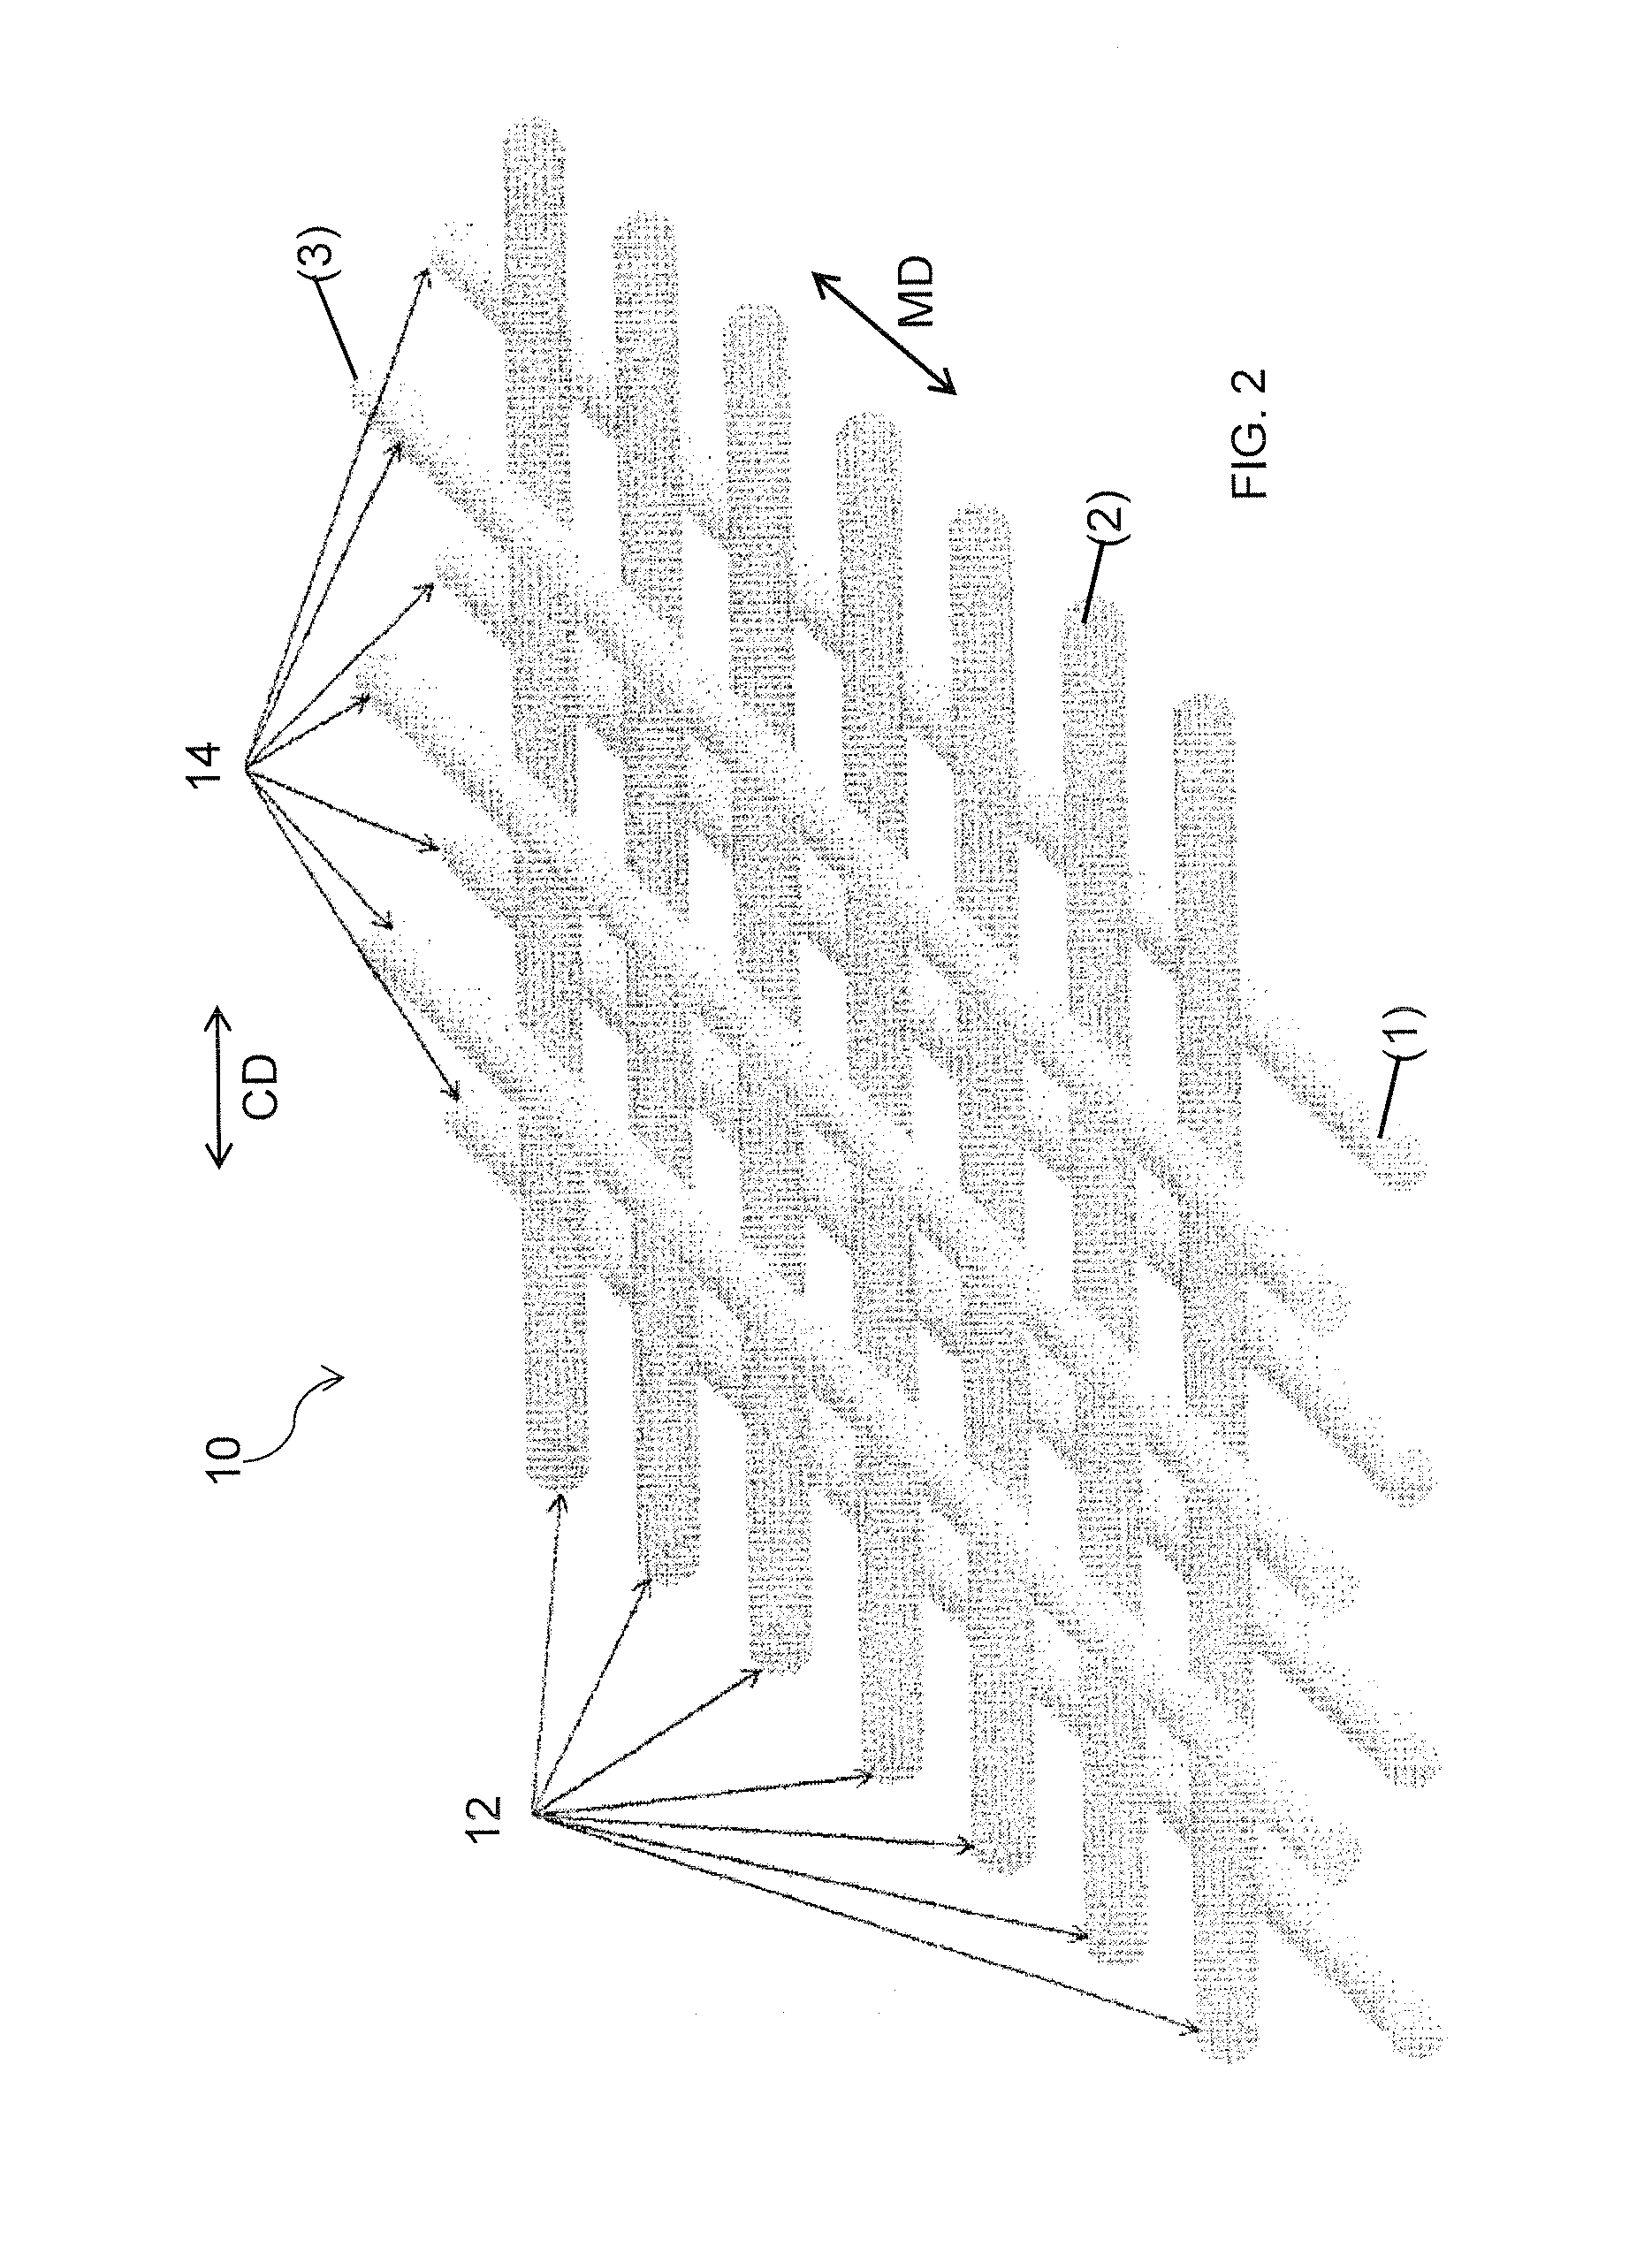 Pad Comprising an Extruded Mesh and Method of Making Thereof